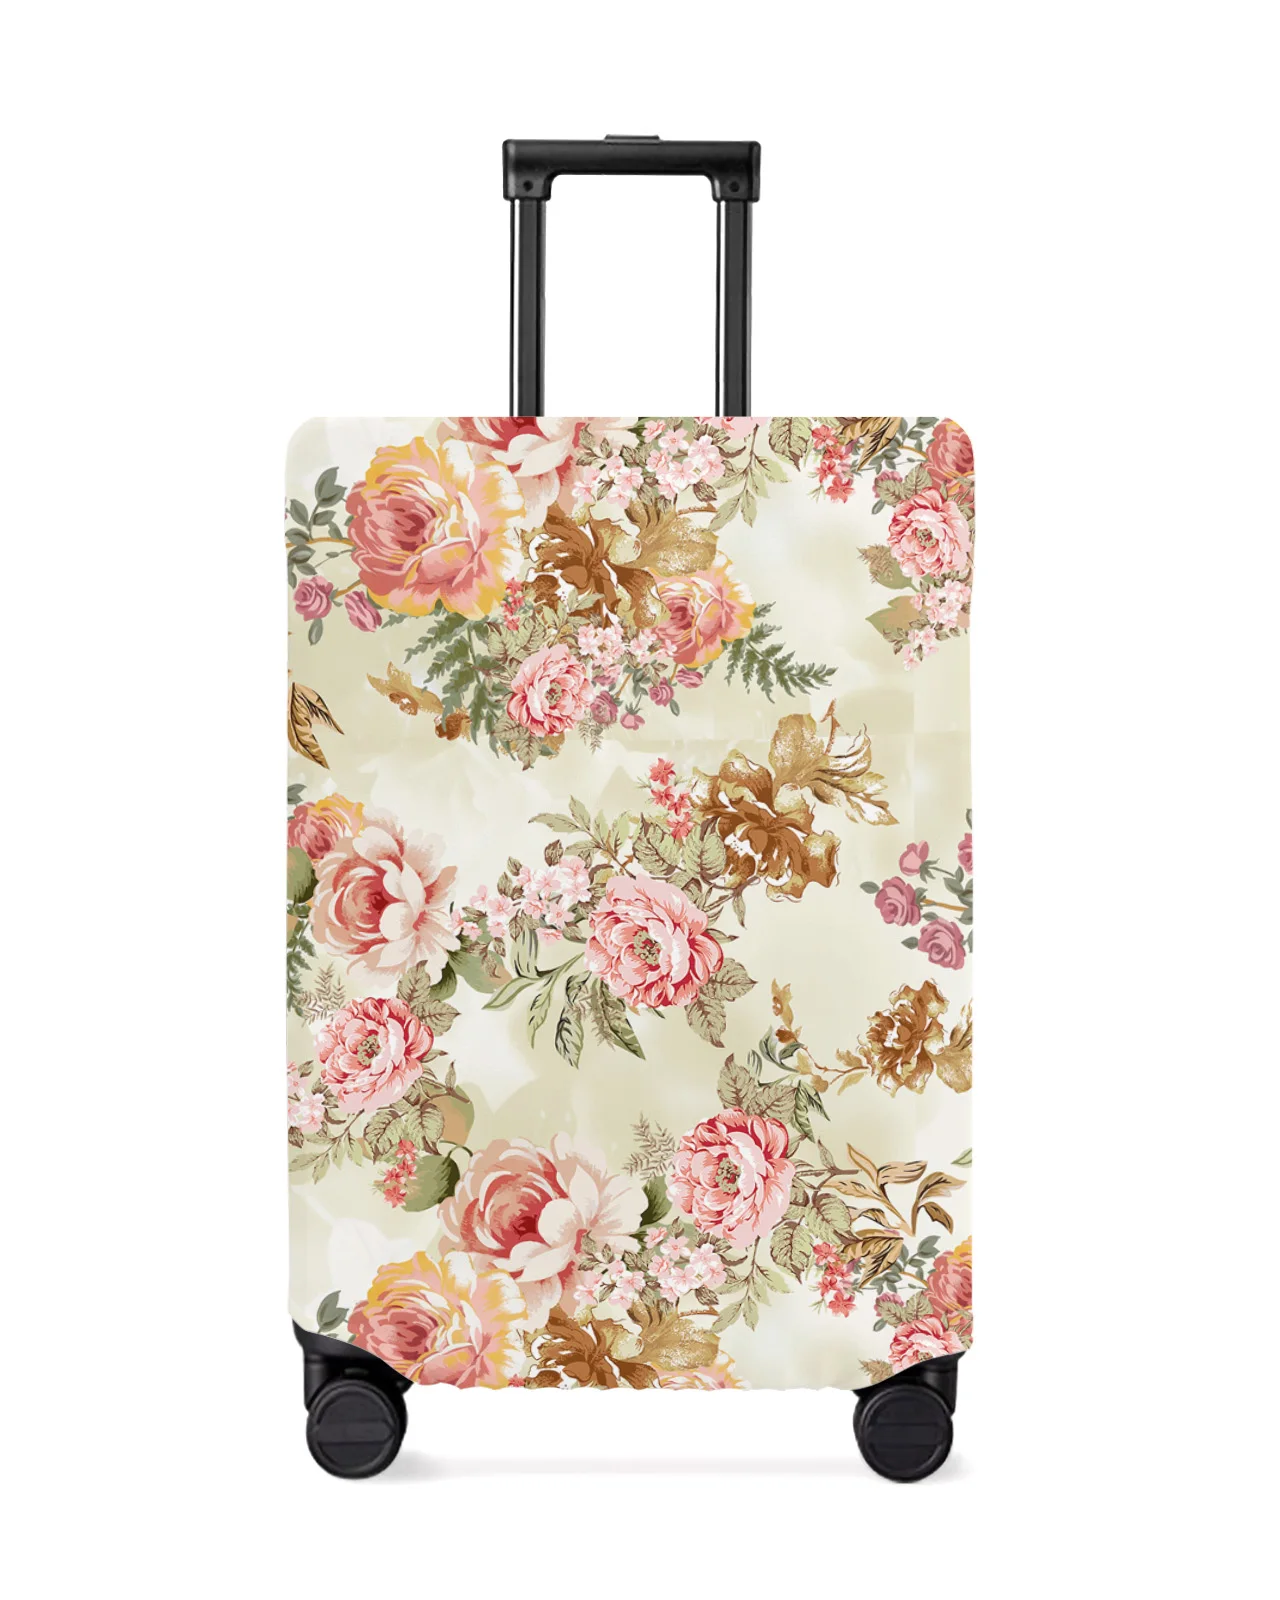 vintage-flower-leaf-abstract-travel-luggage-cover-elastic-baggage-cover-suitcase-case-dust-cover-travel-accessories